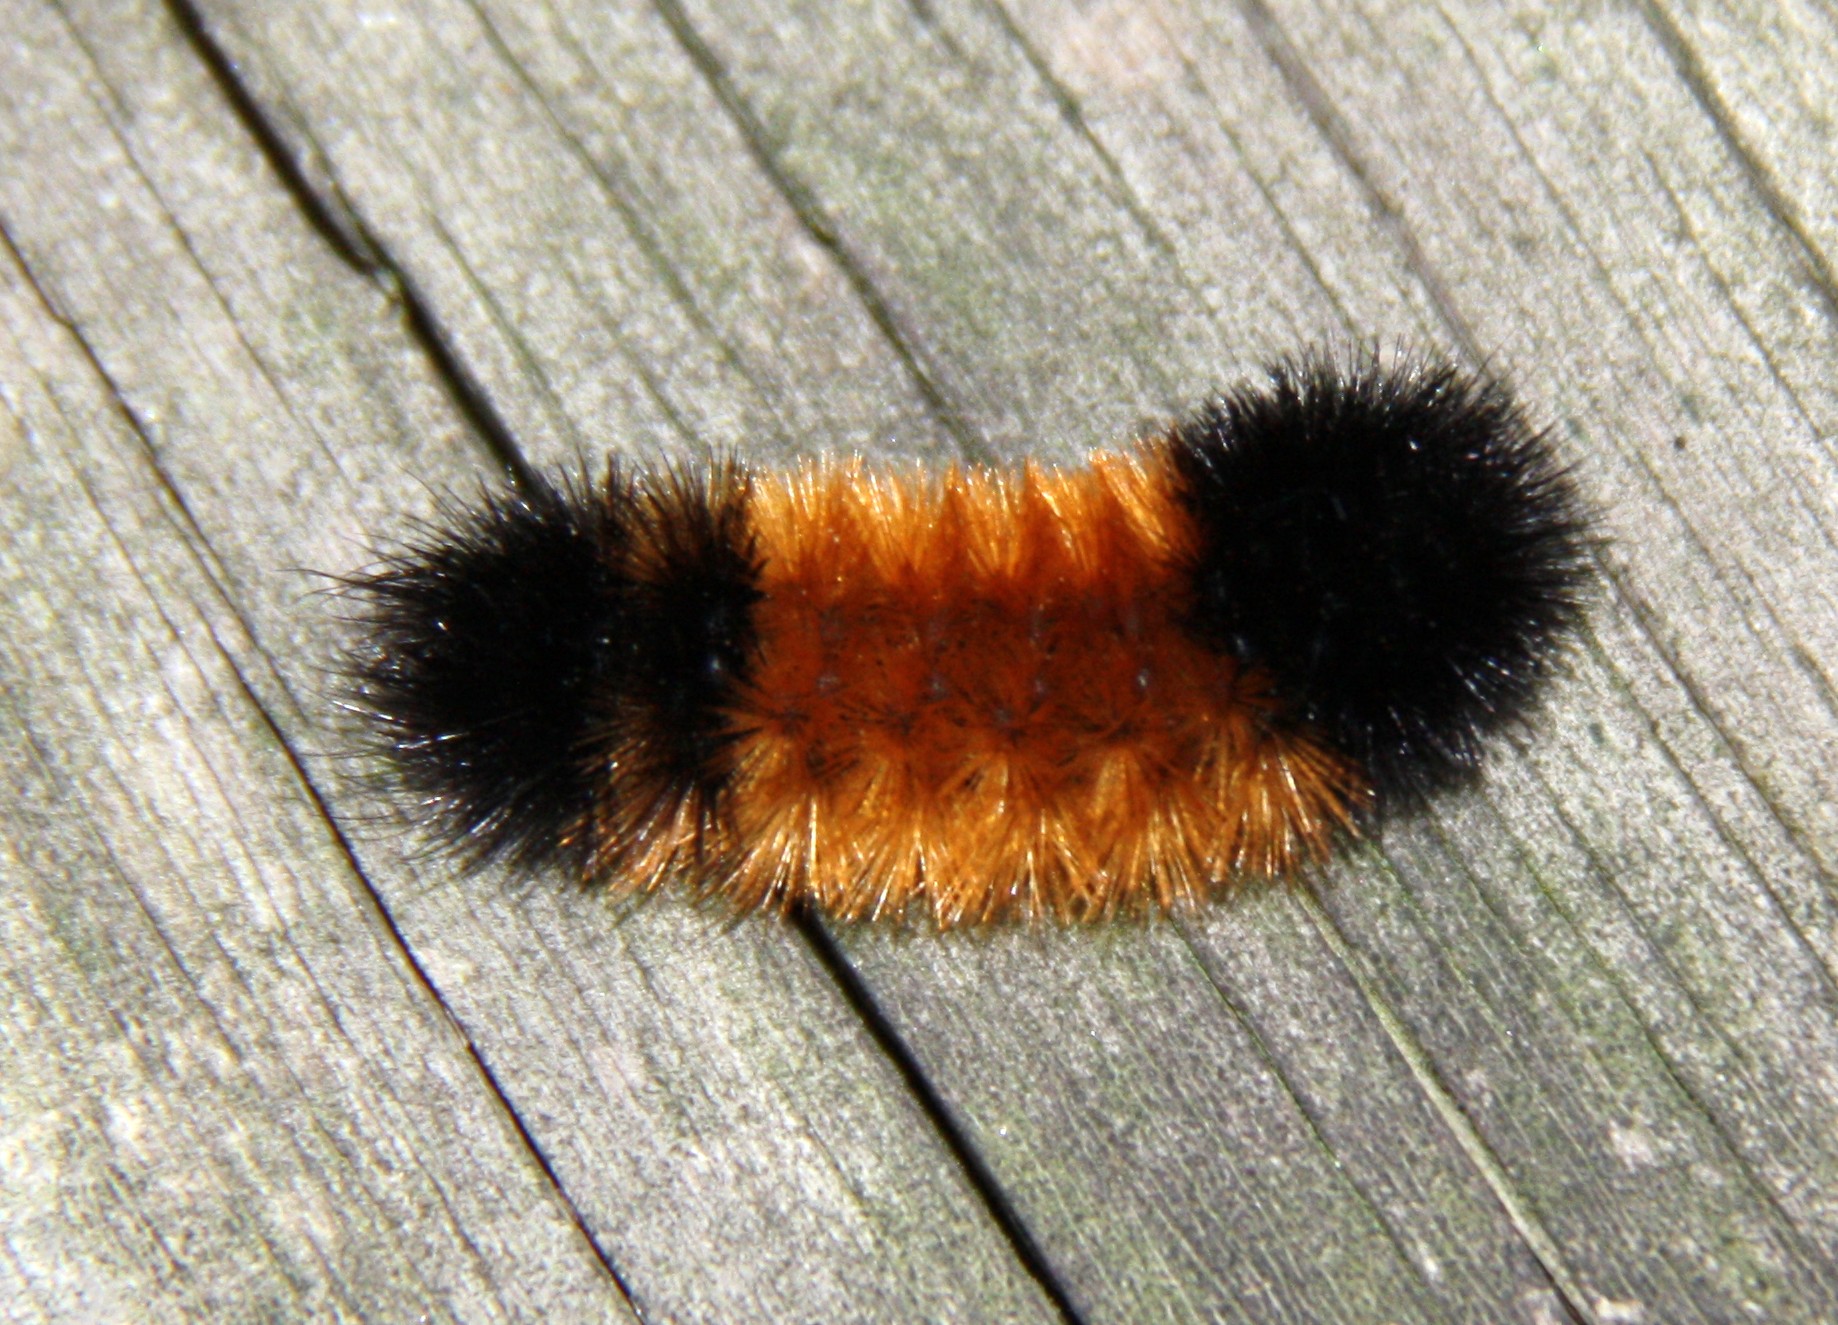 Wooly Worm Pics4Learning